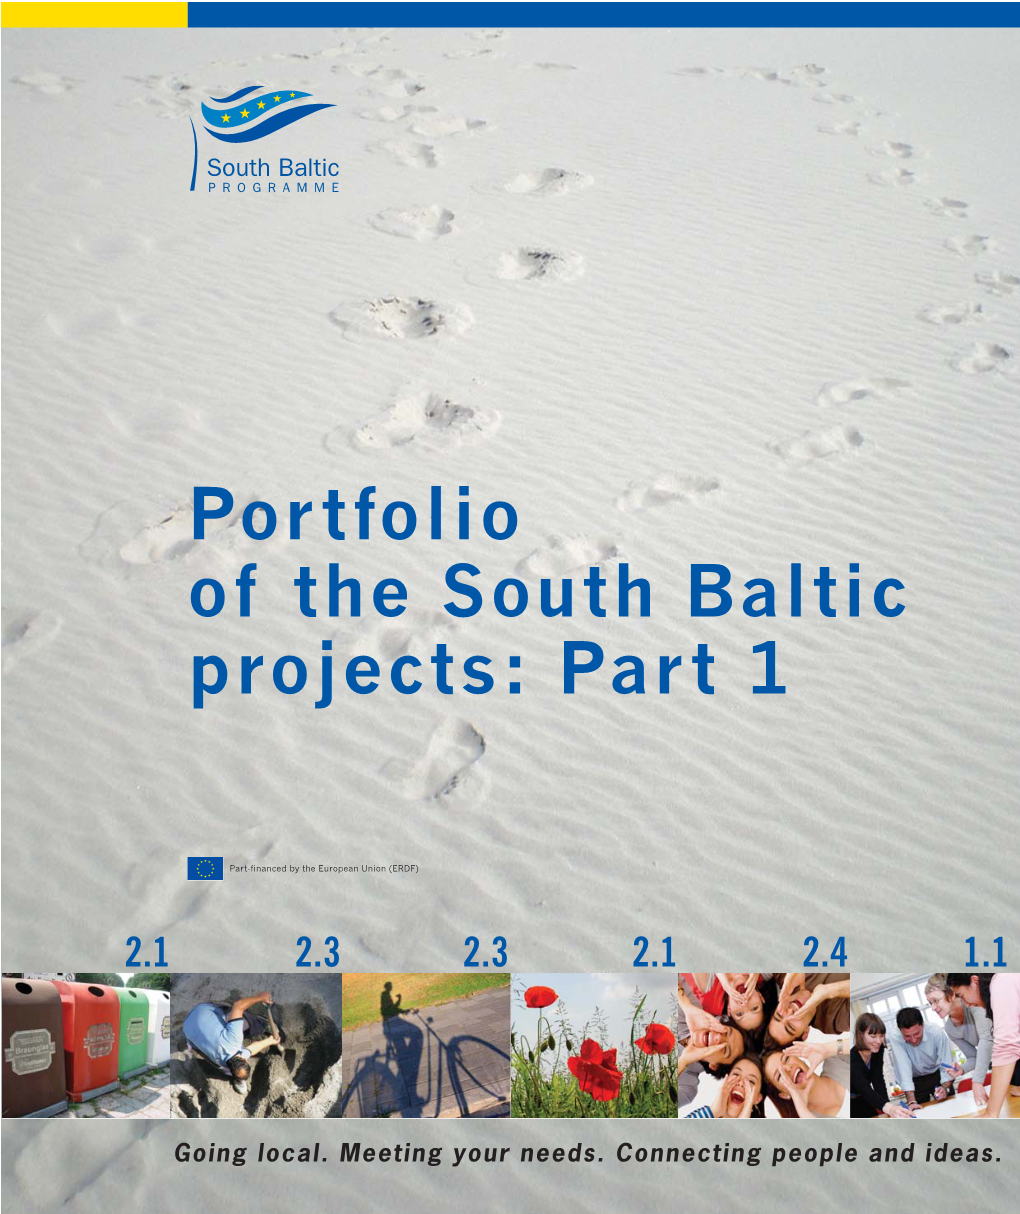 To Download Portfolio of the South Baltic Projects- Part 1 Please Click Here